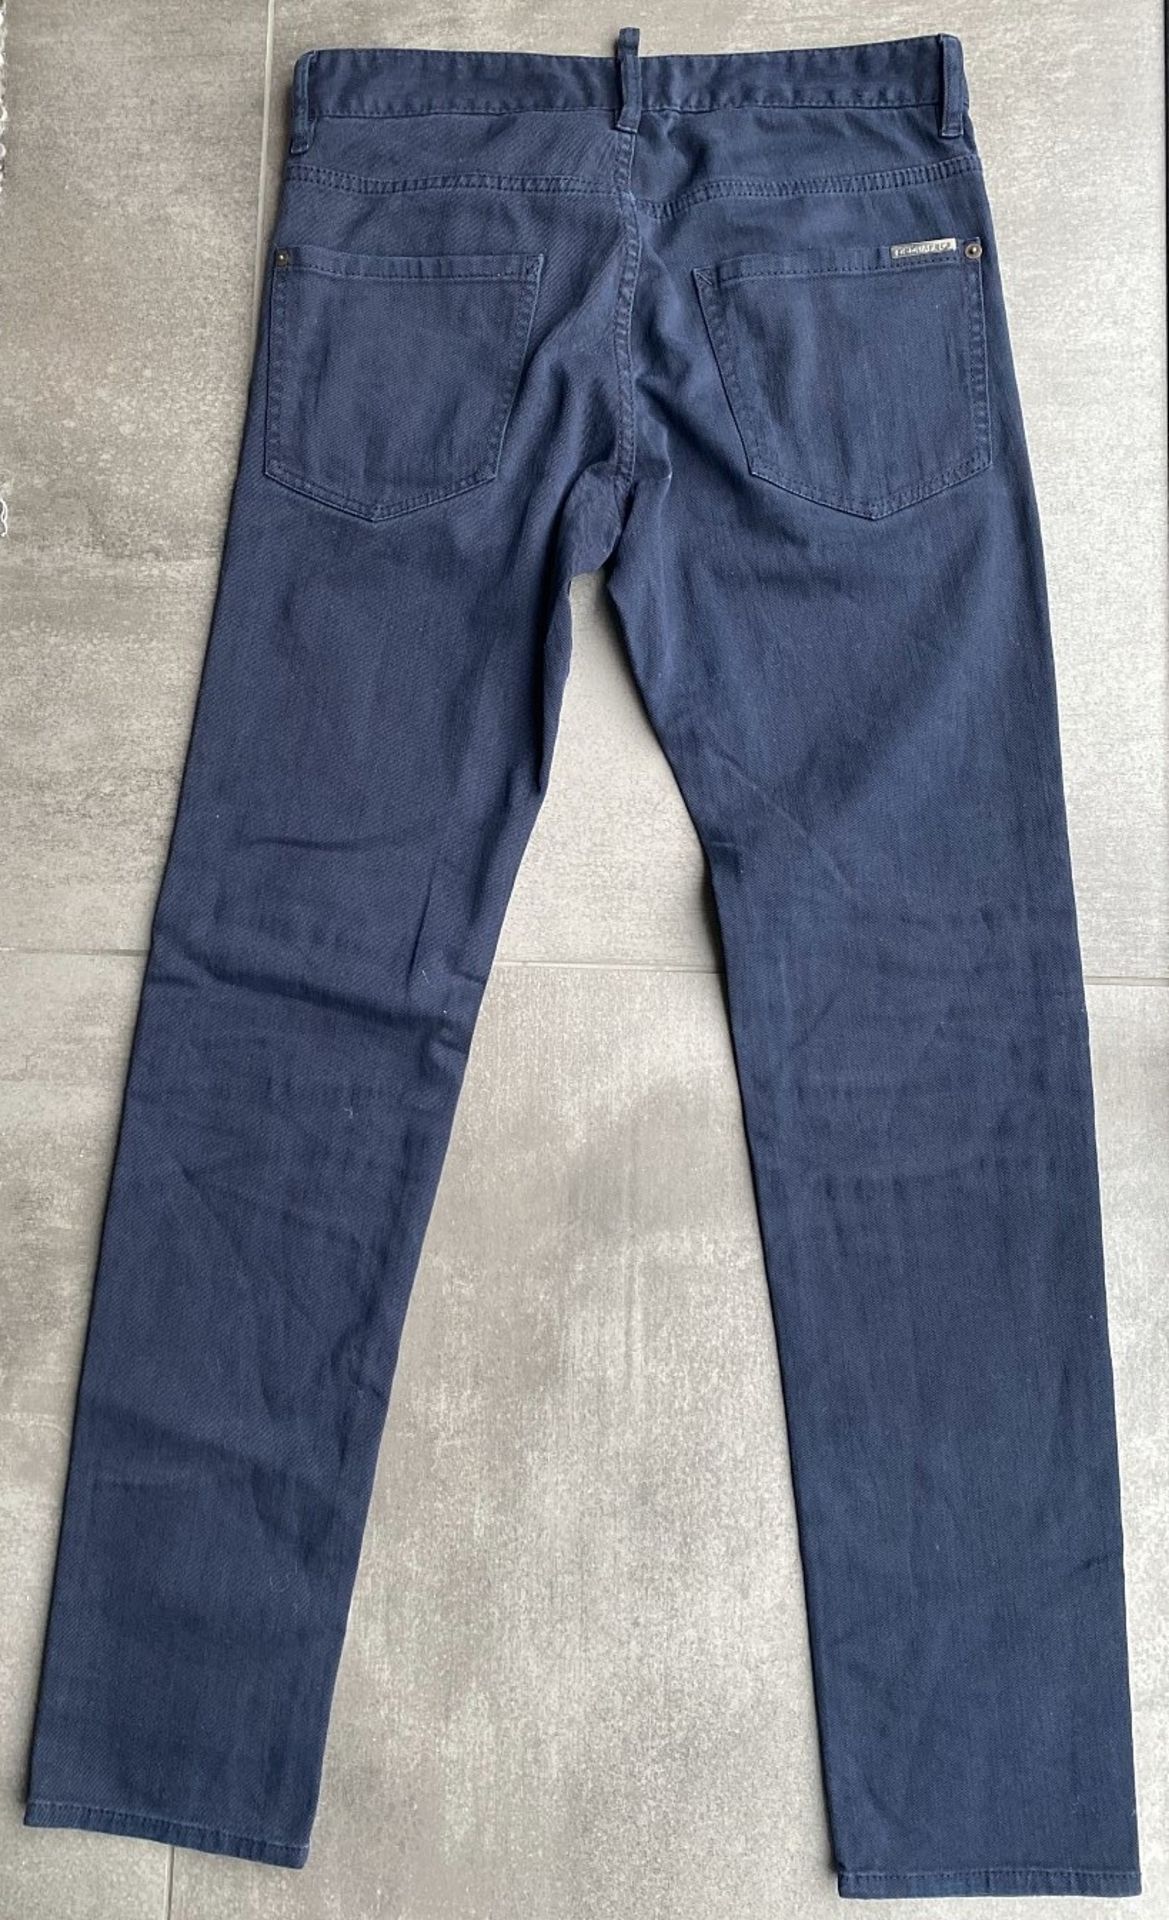 1 x Pair Of Men's Genuine Dsquared2 Designer Jeans In Navy - Waist Size: UK 30 / ITALY 46 - Preowned - Image 2 of 6